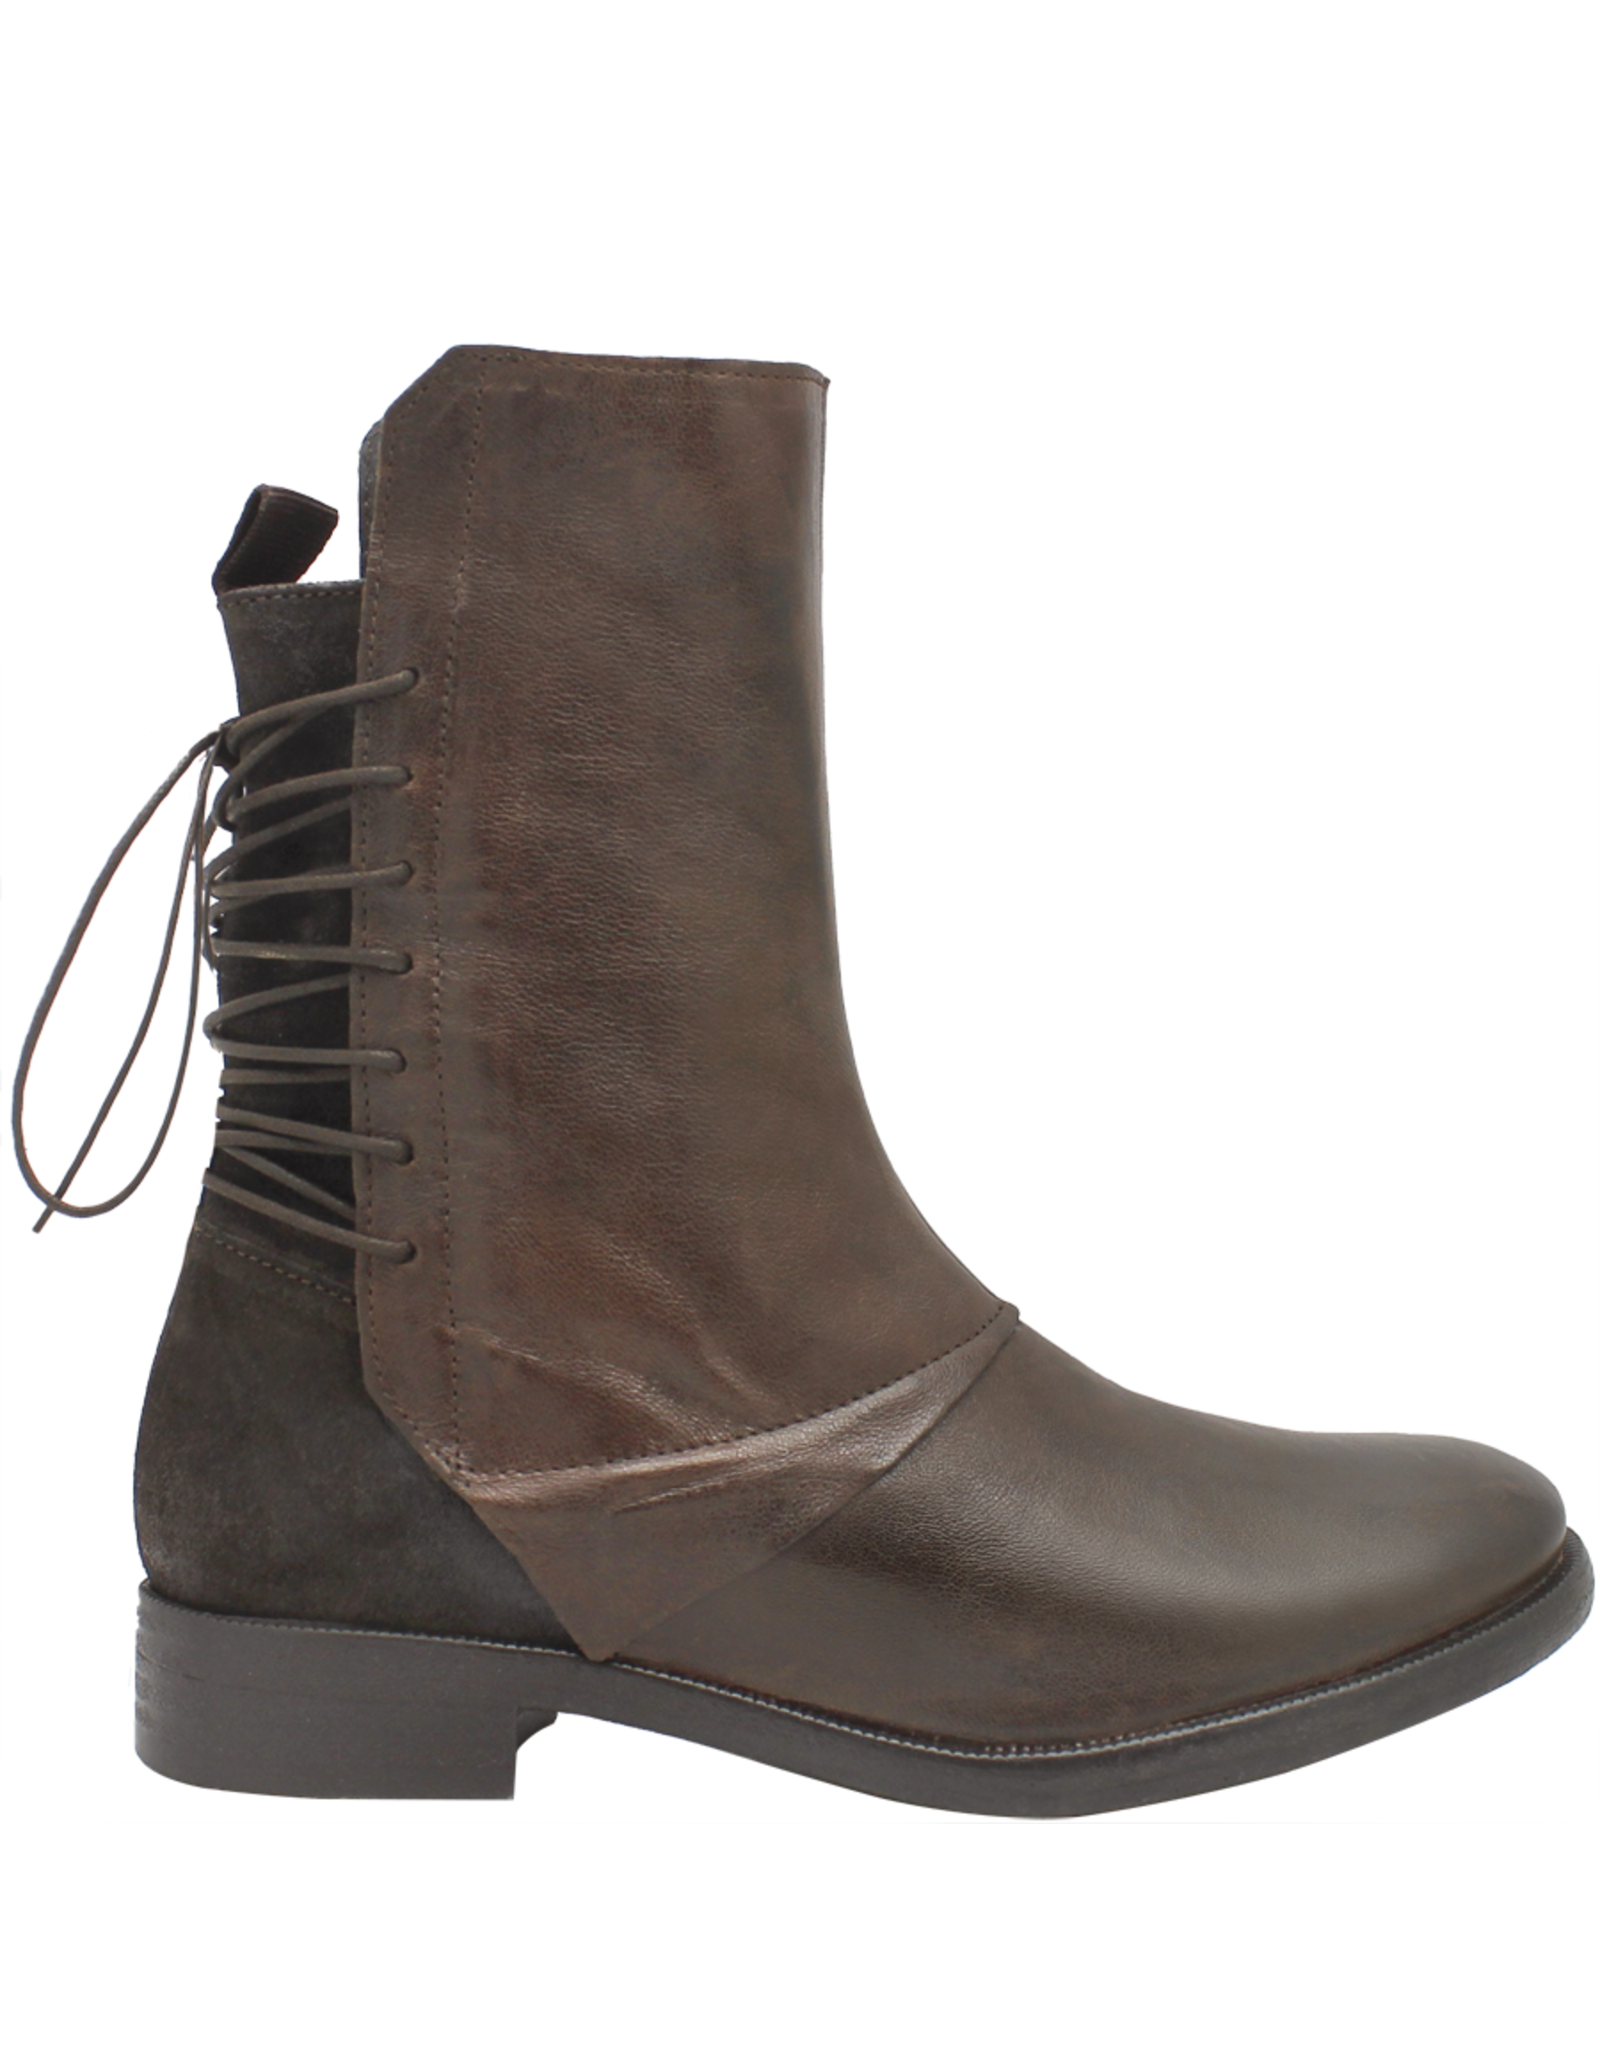 Anis Anis SN3H Brown Tie Back Boot Bette